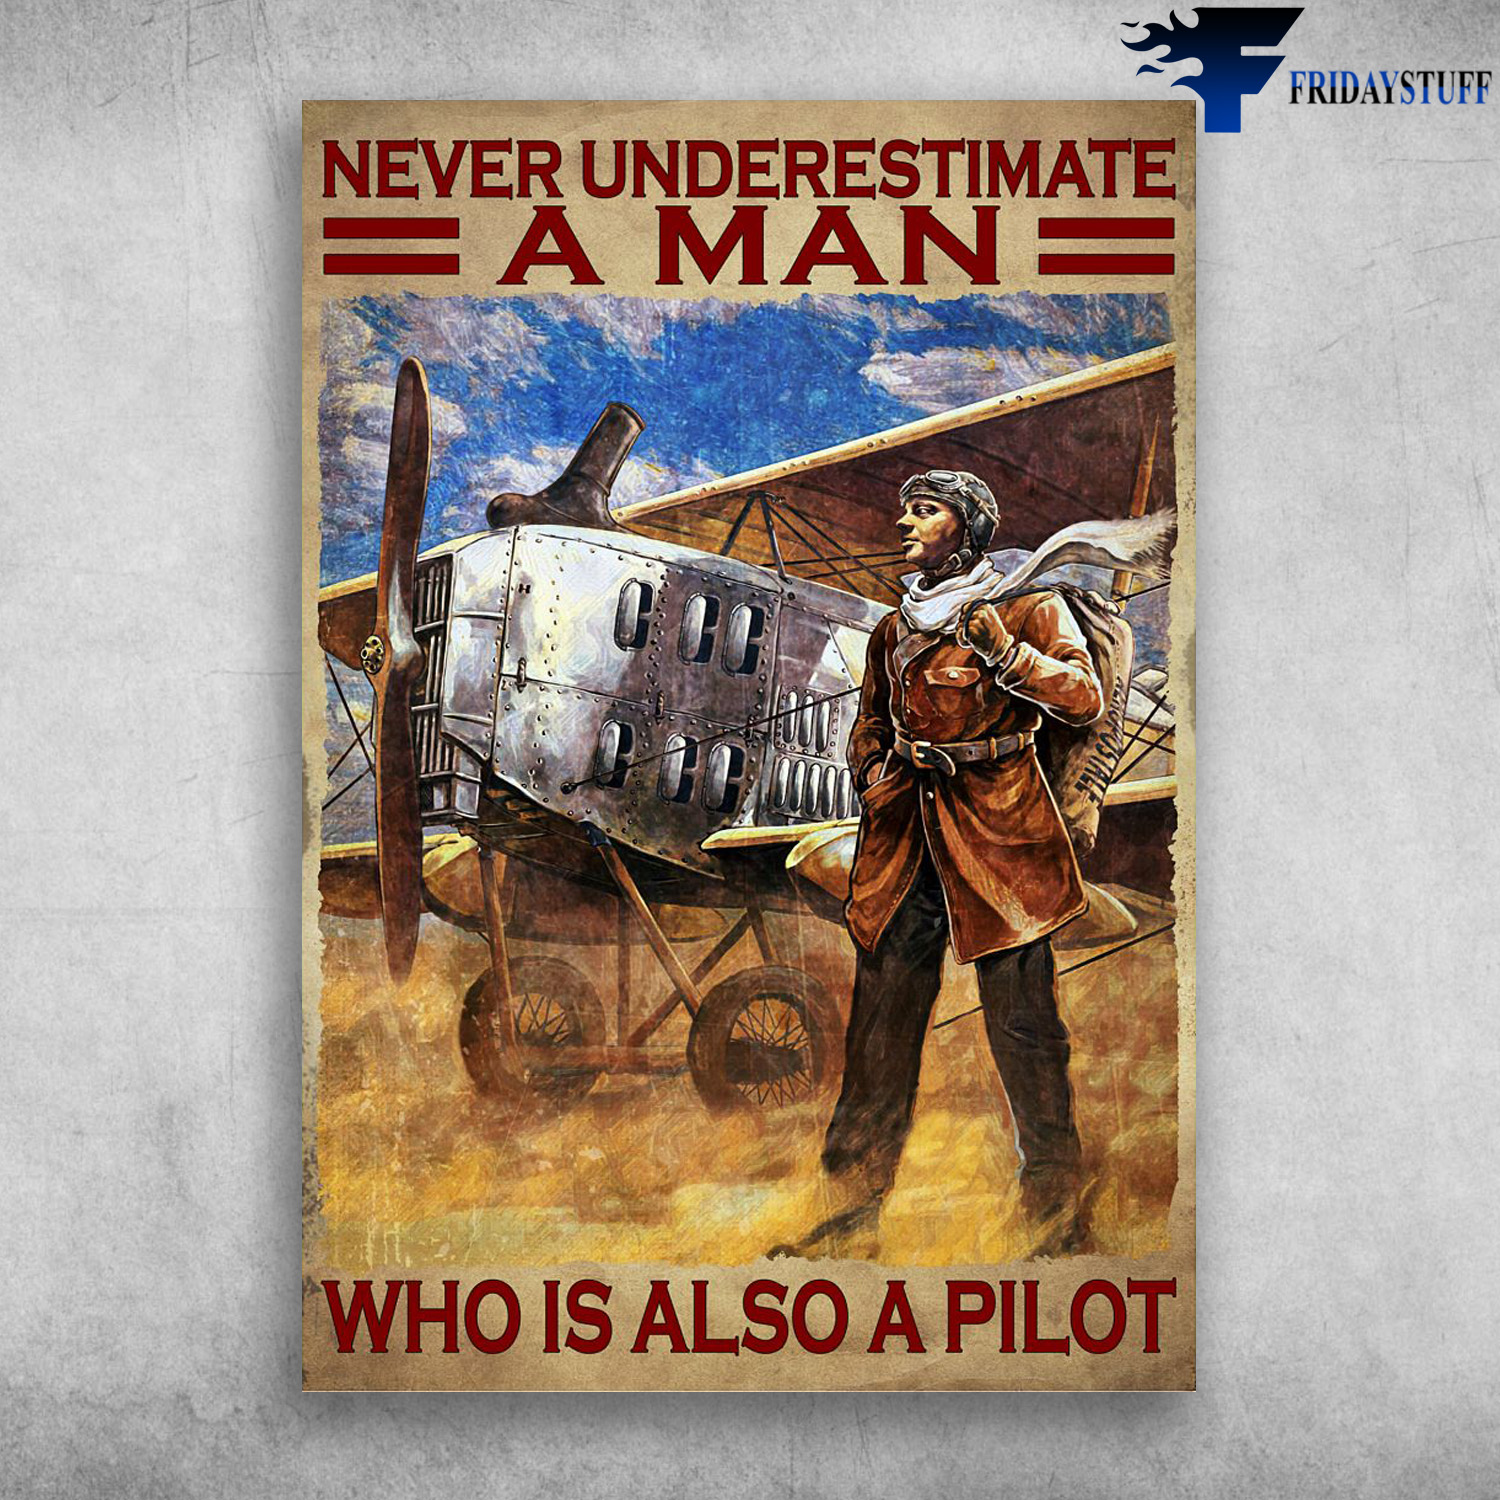 Pilot And Aircraft - Never Underestimate A Man, Who Is Also A Pilot